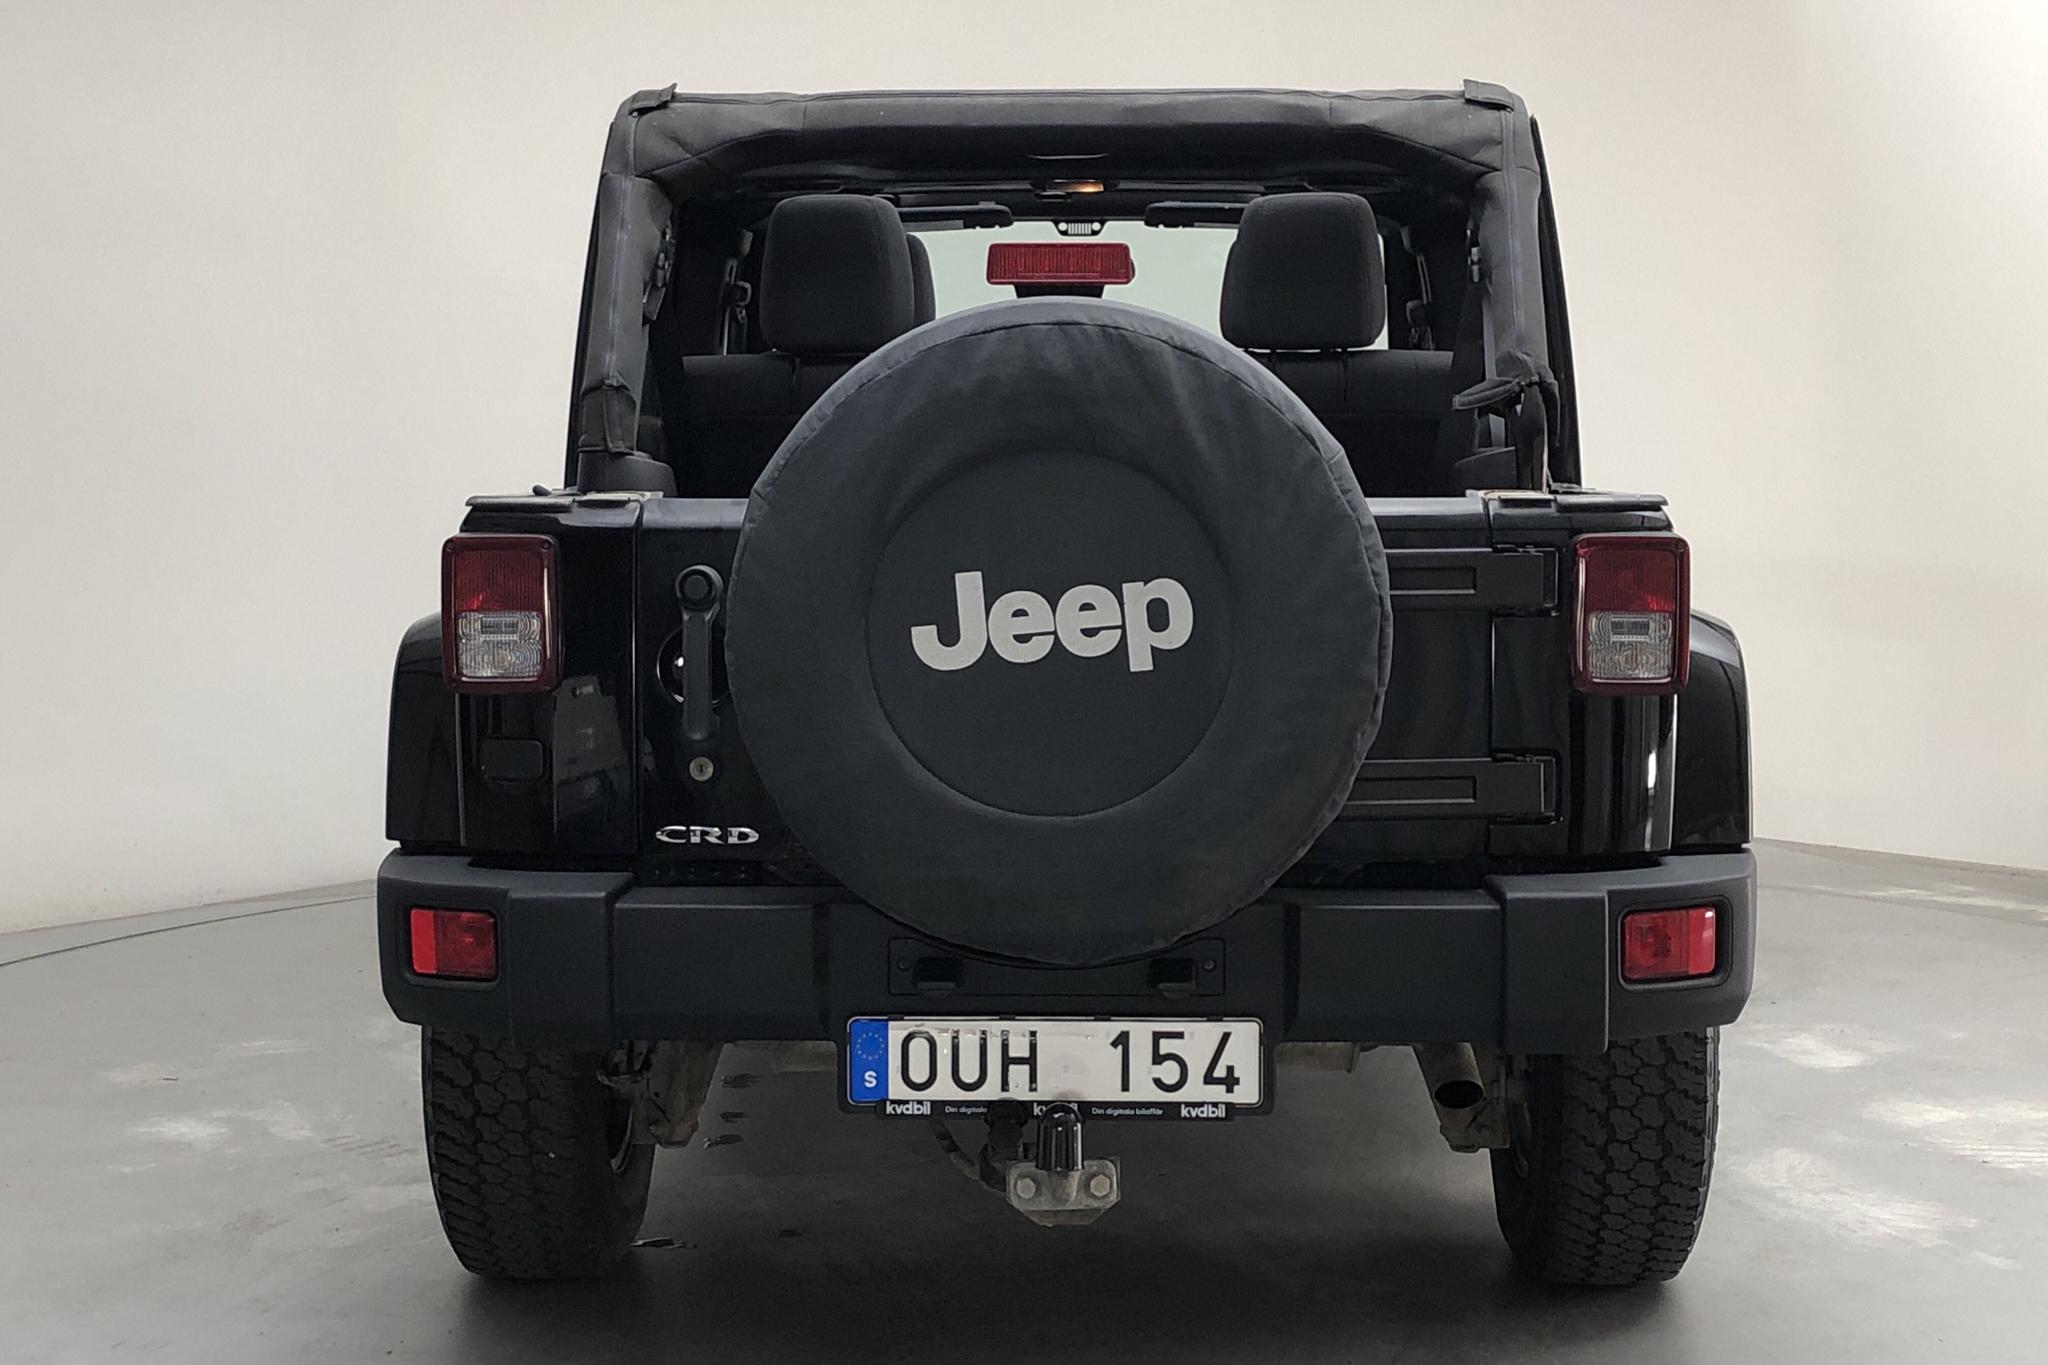 Jeep Wrangler Unlimited 2.8 CRD 4dr (200hk) - 125 610 km - Automatic - black - 2012